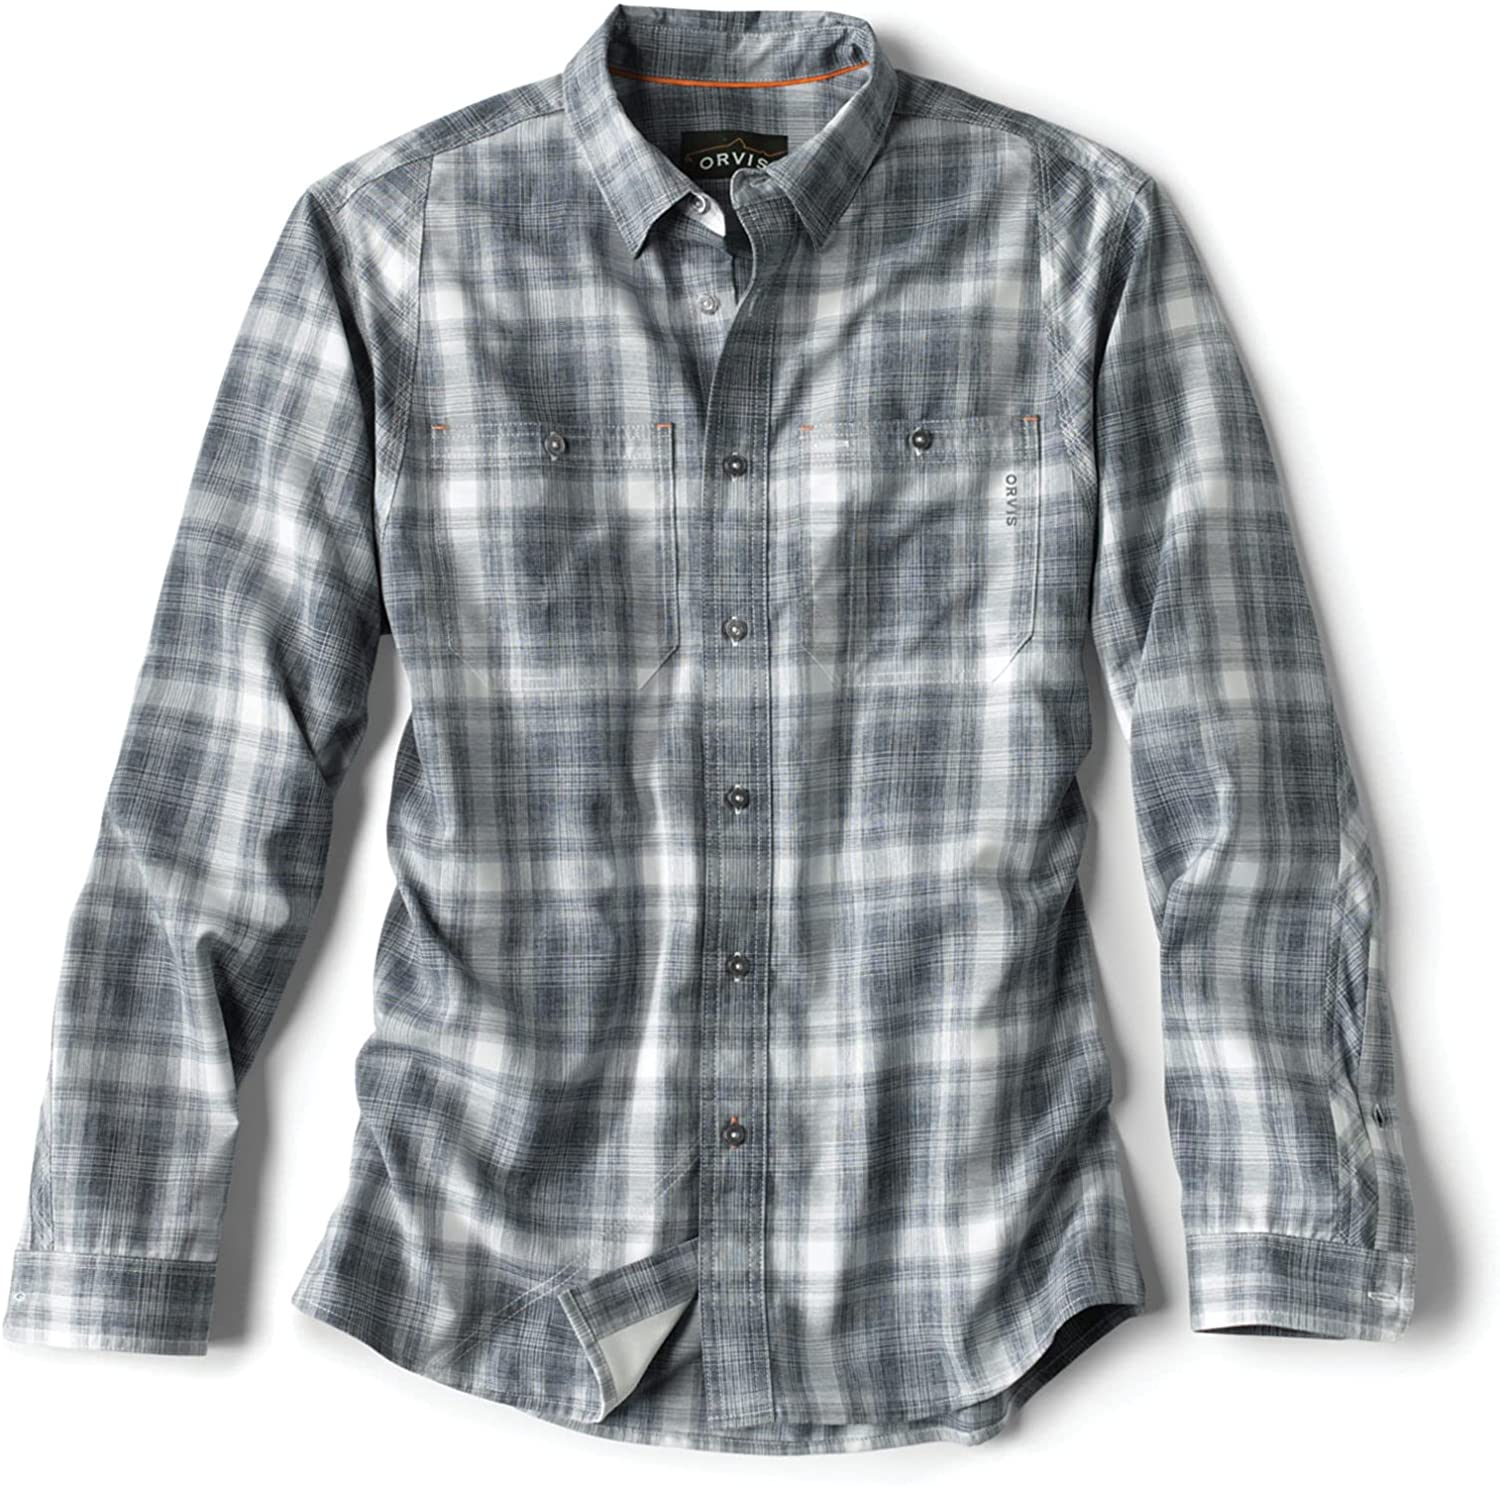 Tech Chambray Plaid Workshirt in Navy from front view